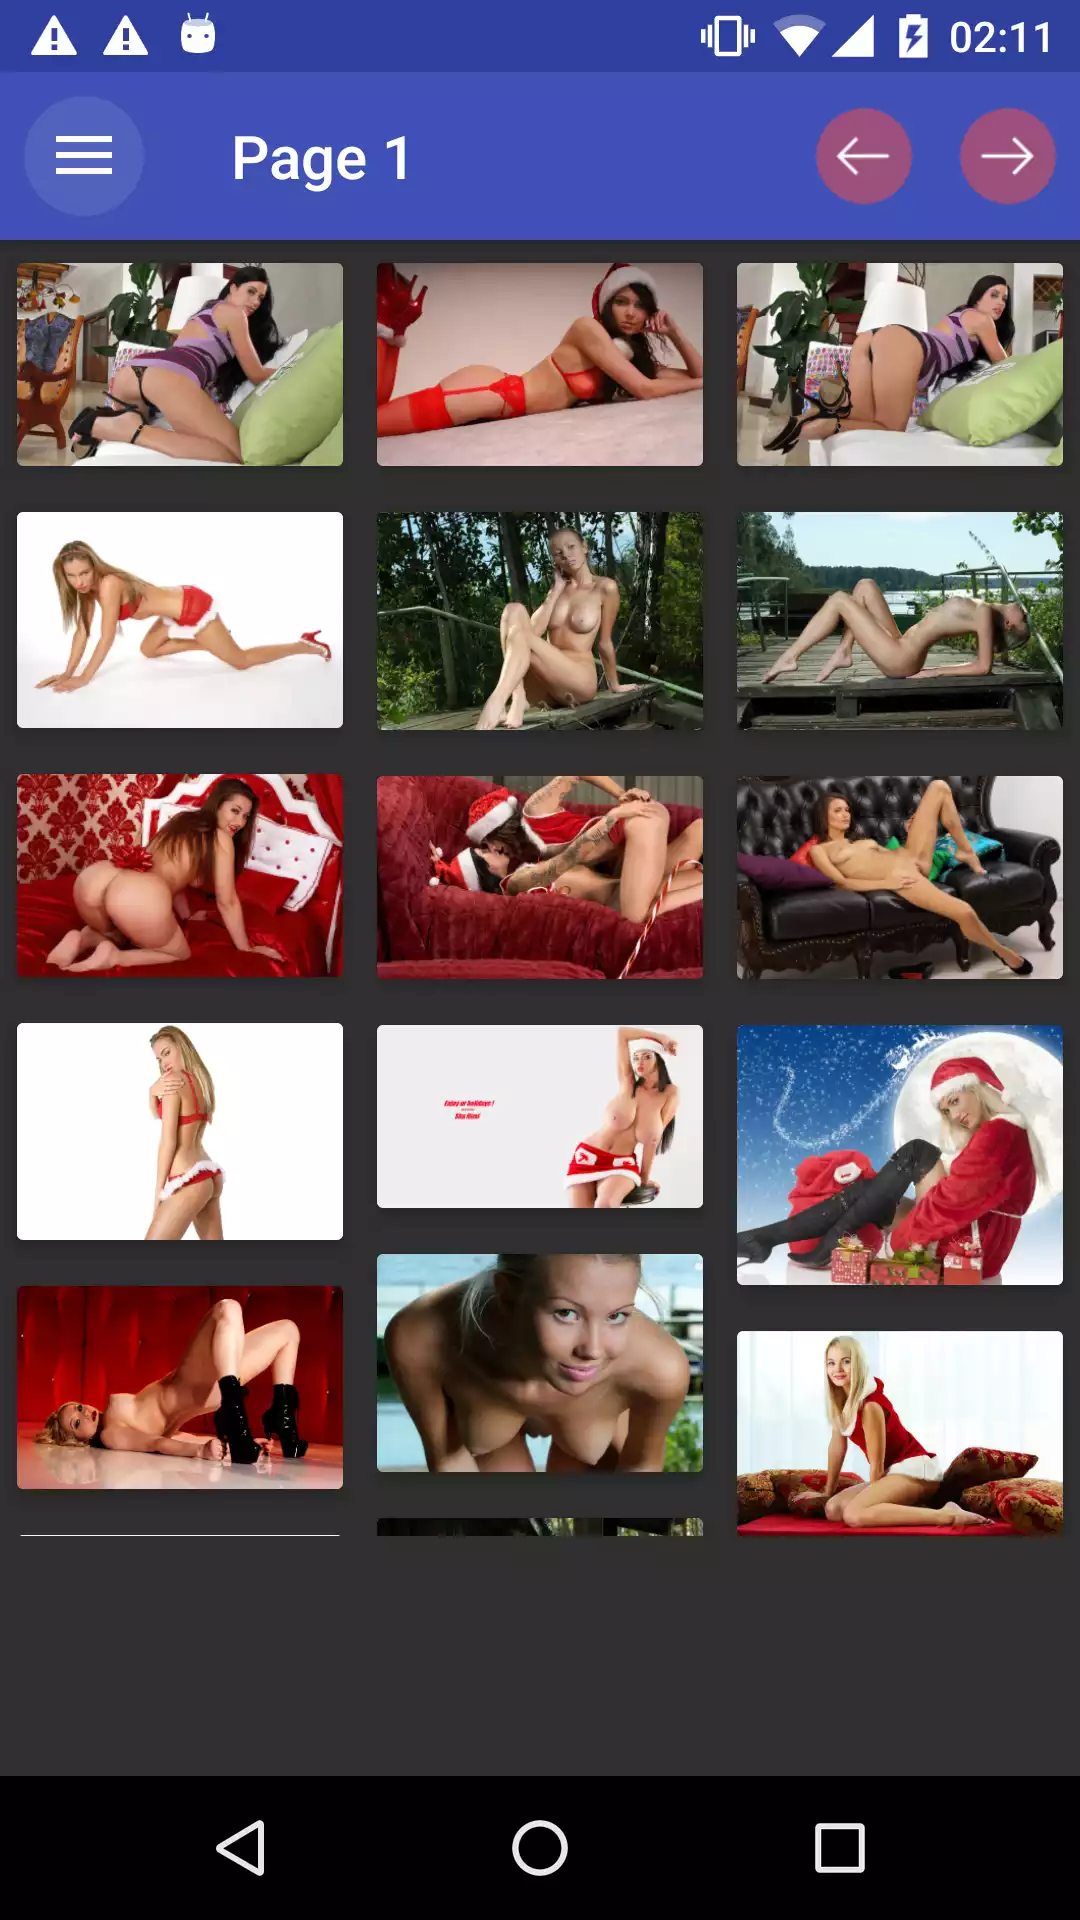 xxx-holidays wallpaper,pictures,picw,android,hentai,pornstars,aplikasi,photos,download,rated,app,offline,sexy,adult,porn,apps,wallpapers,backgrounds,apk